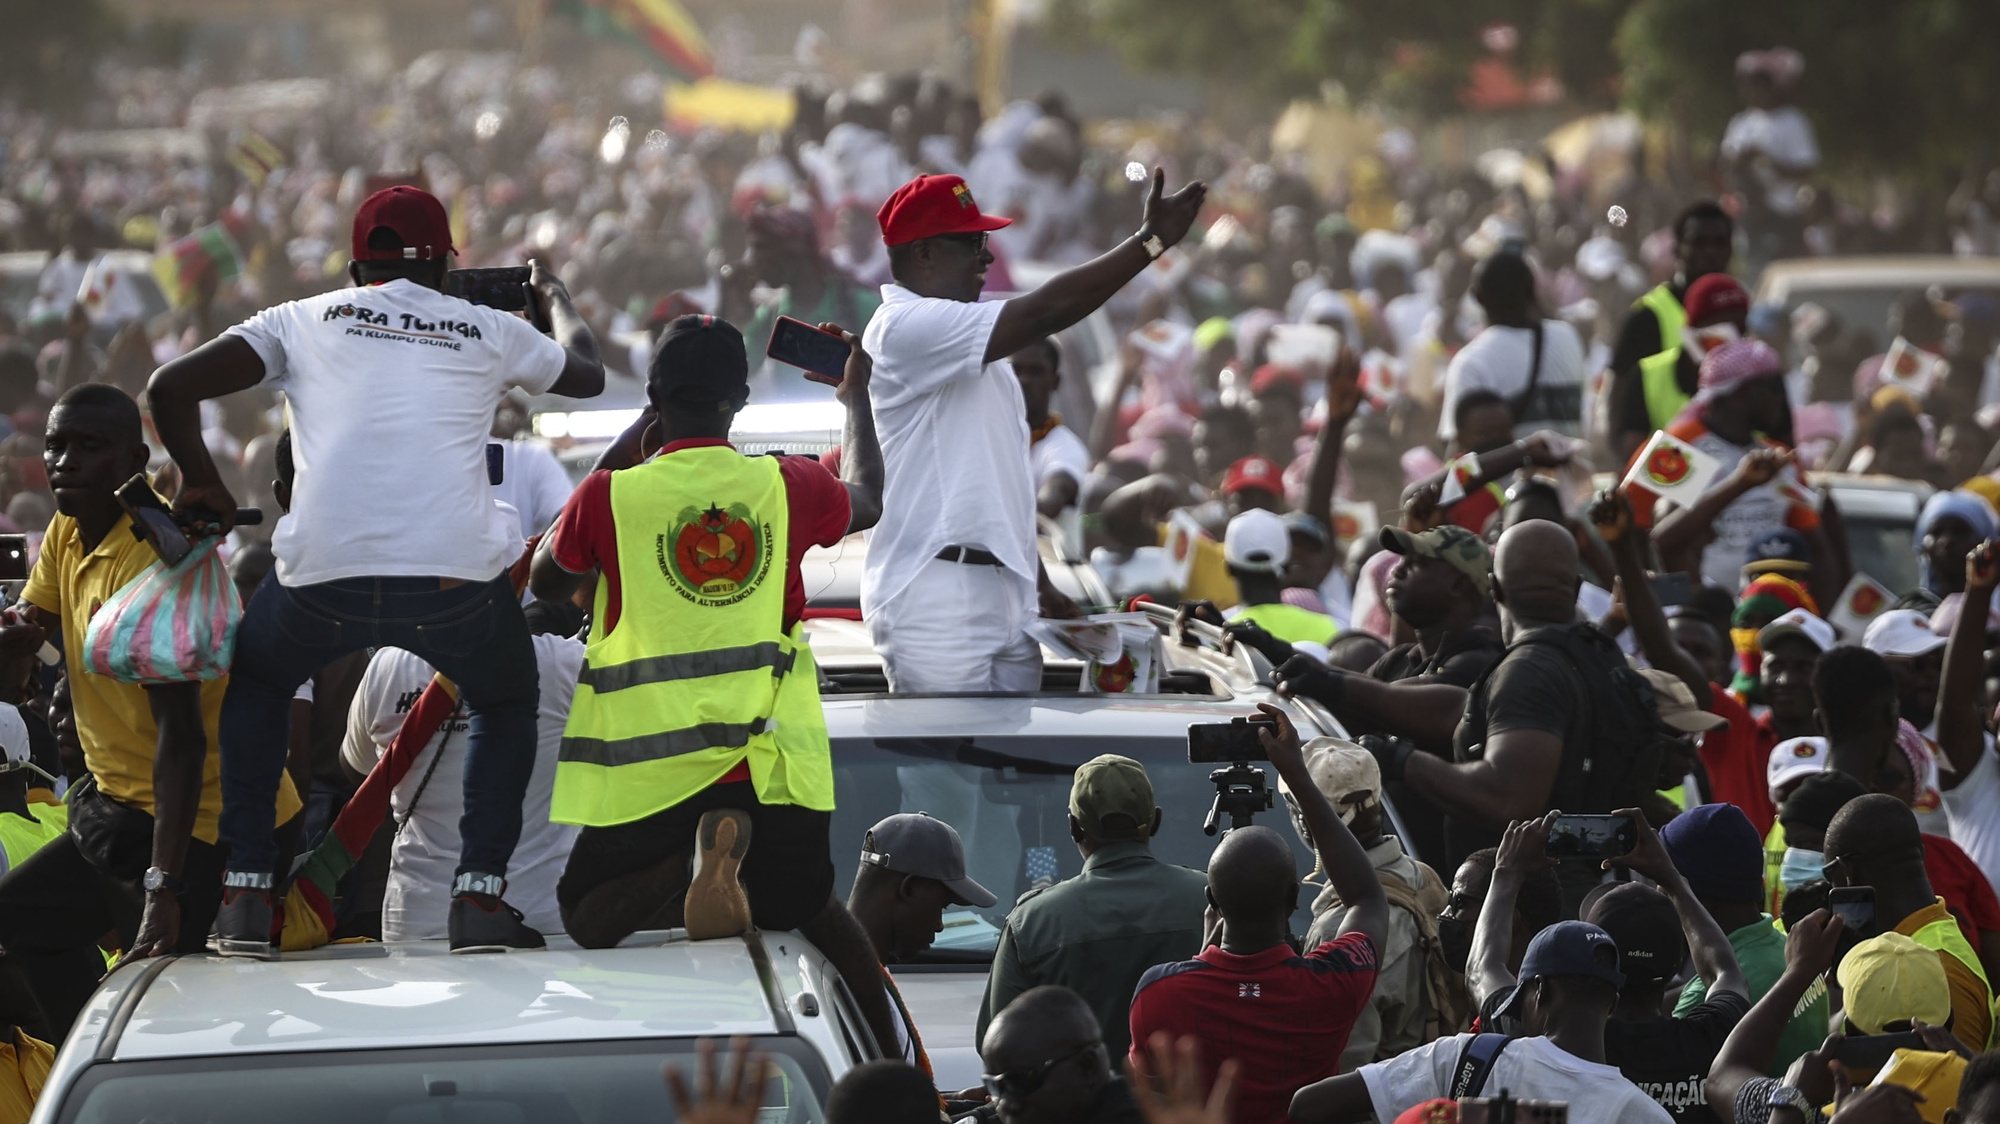 Braima Camara leader of Movement for Democratic Alternation (Madem-G15) during a rally for the Guinea-Bissau’s legislative elections, in Bissau, 28 May 2023. The polls to choose 102 deputies among 20 parties and two coalitions were scheduled 4th June 2023 following the dissolution of the National People’s Assembly (NPA) by President Umaro Sissoco Embaló in May 2022. ANDRE KOSTERS / LUSA